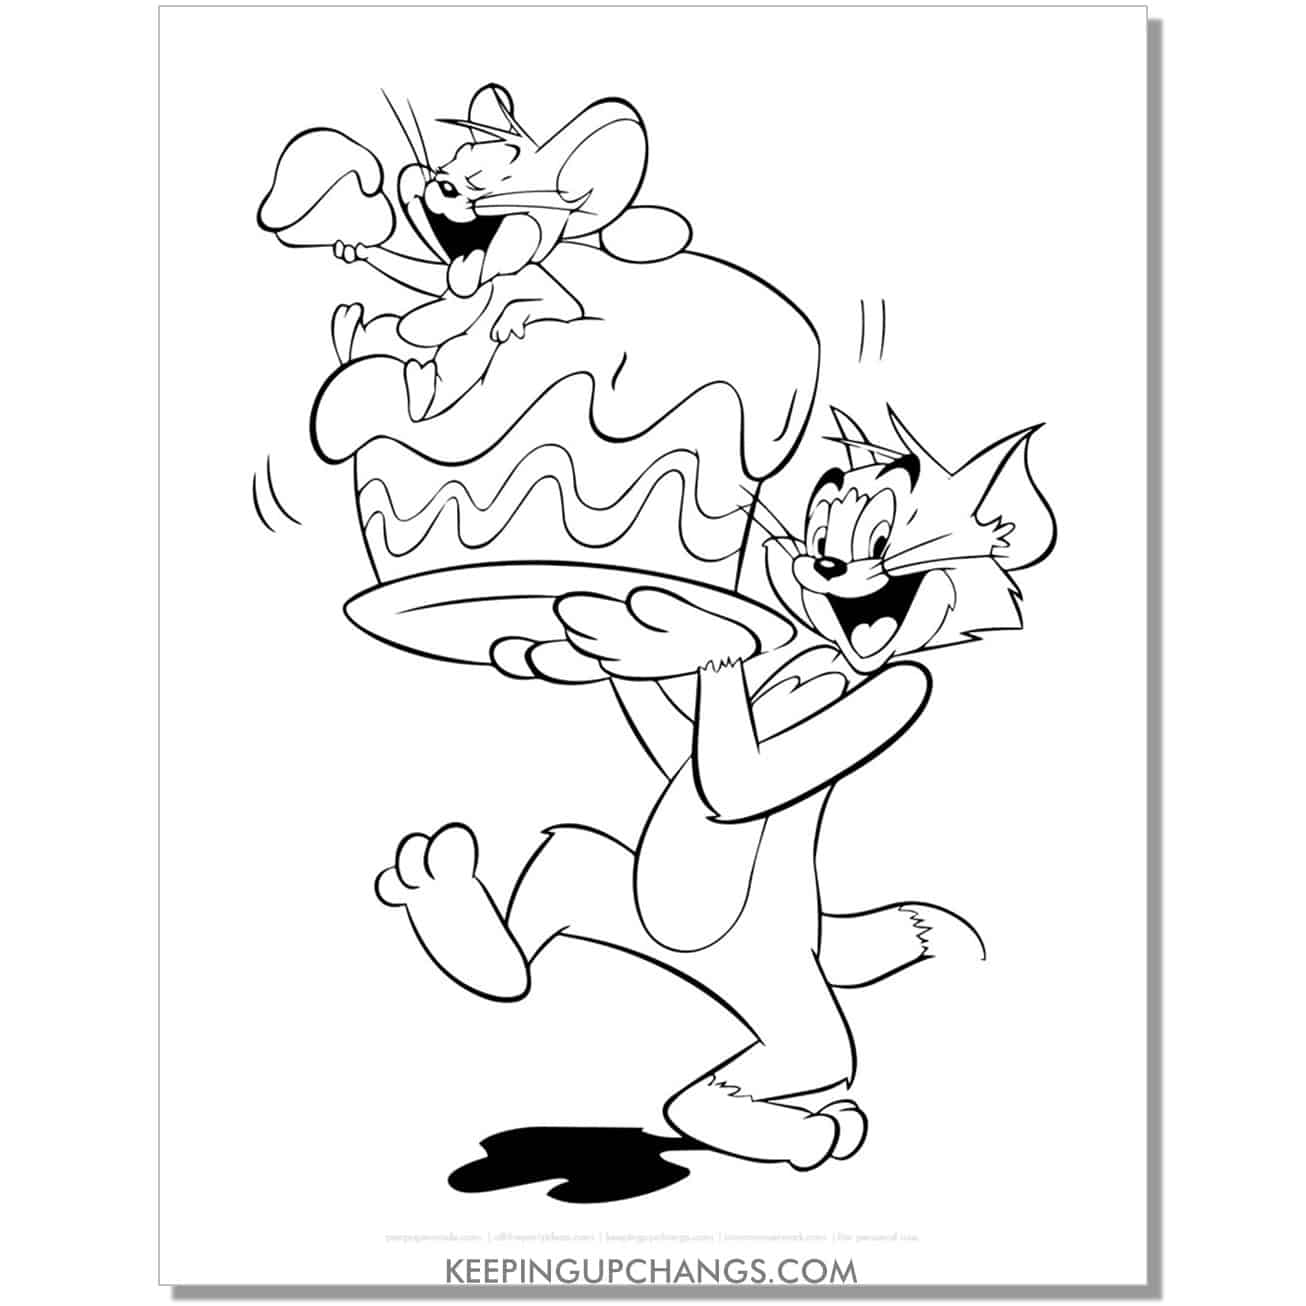 free tom and jerry carrying large cake coloring page.